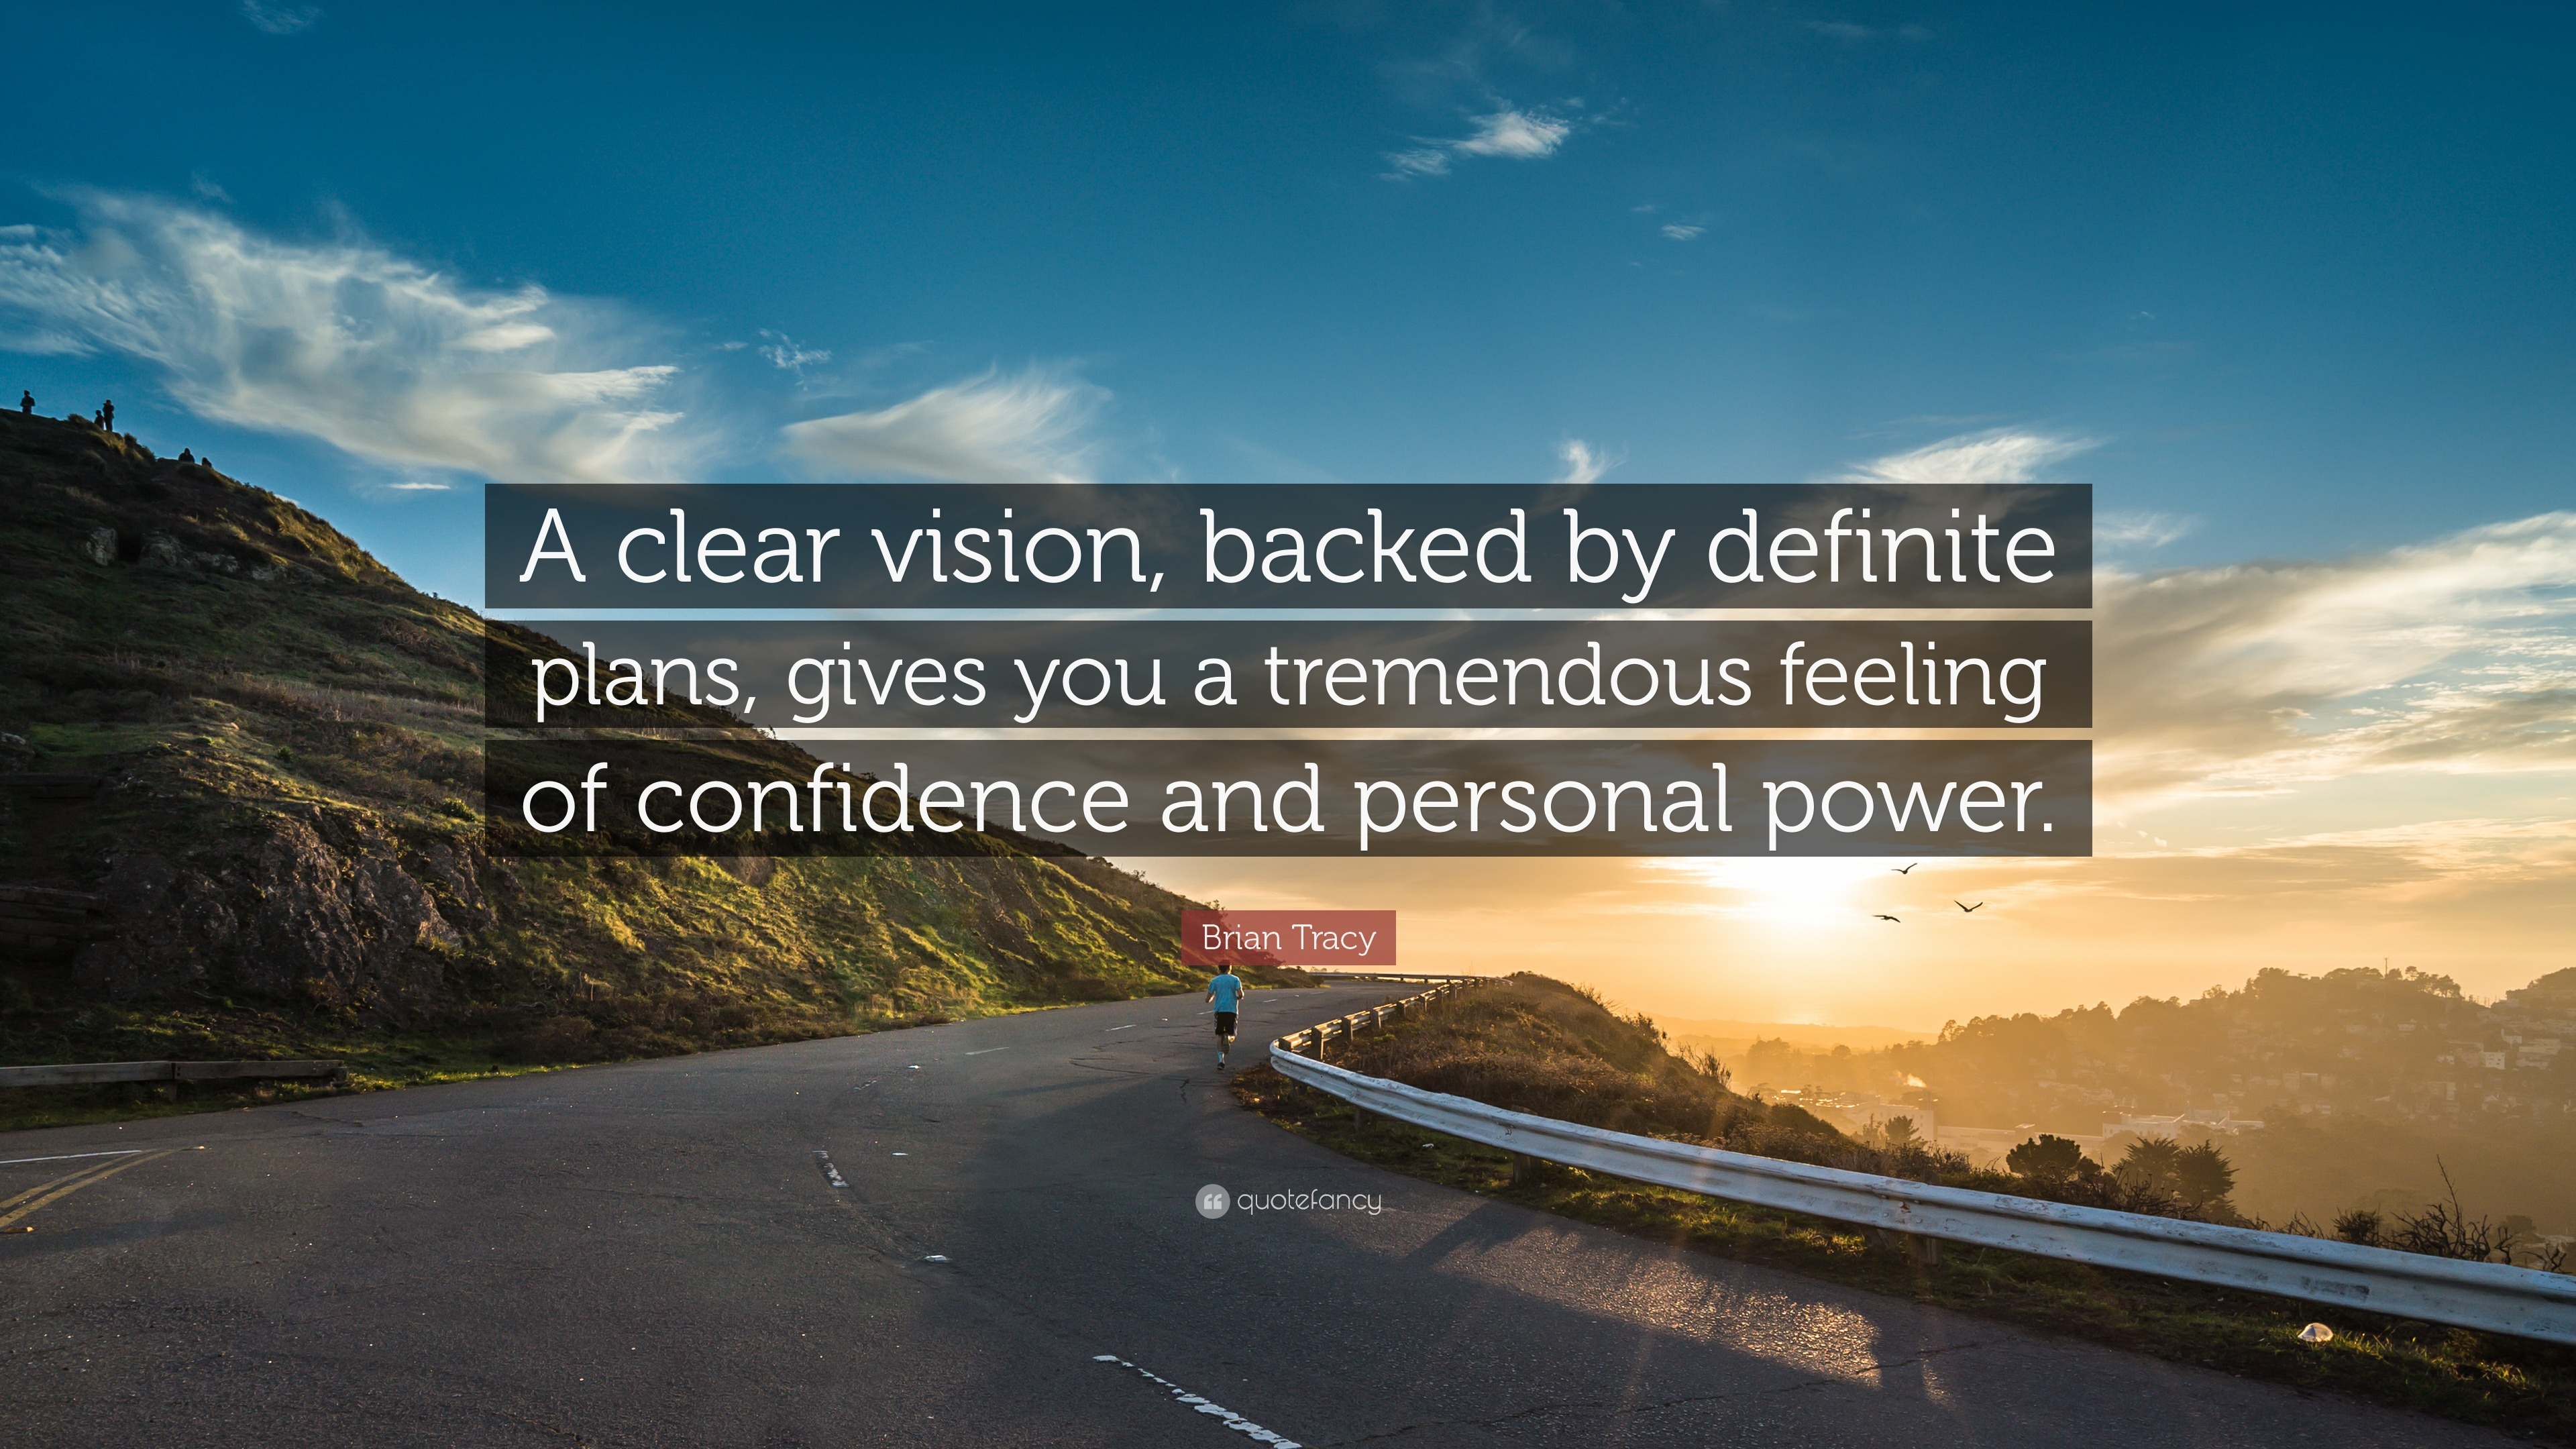 Brian Tracy Quote: “A clear vision, backed by definite plans, gives you a  tremendous feeling of